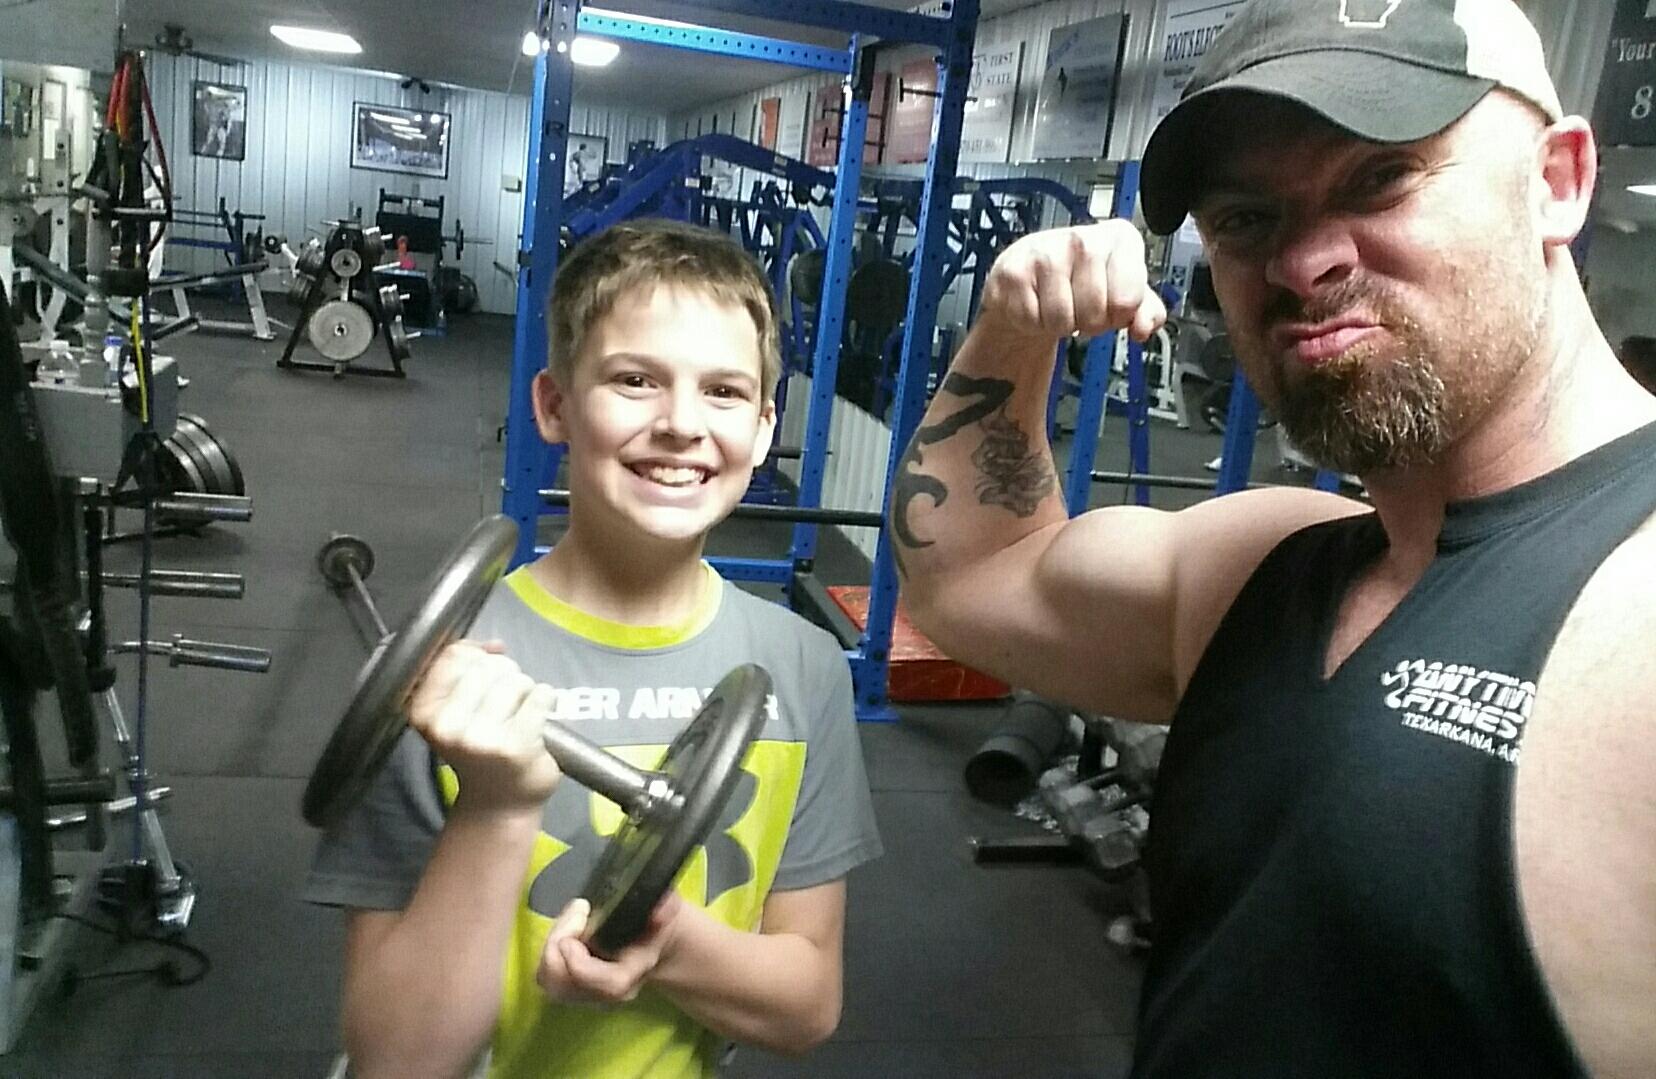 Brandon Pope is a survivalist and a self-admitted "fitness nut" who dedicates his free time to lifting weights and spending time with his children - Jayden and Journey - teaching them survival skills, Bushcraft, and enjoying the outdoors. He is pictured with his son, Jayden, 13, after a workout session at Flex Gym in Nashville.